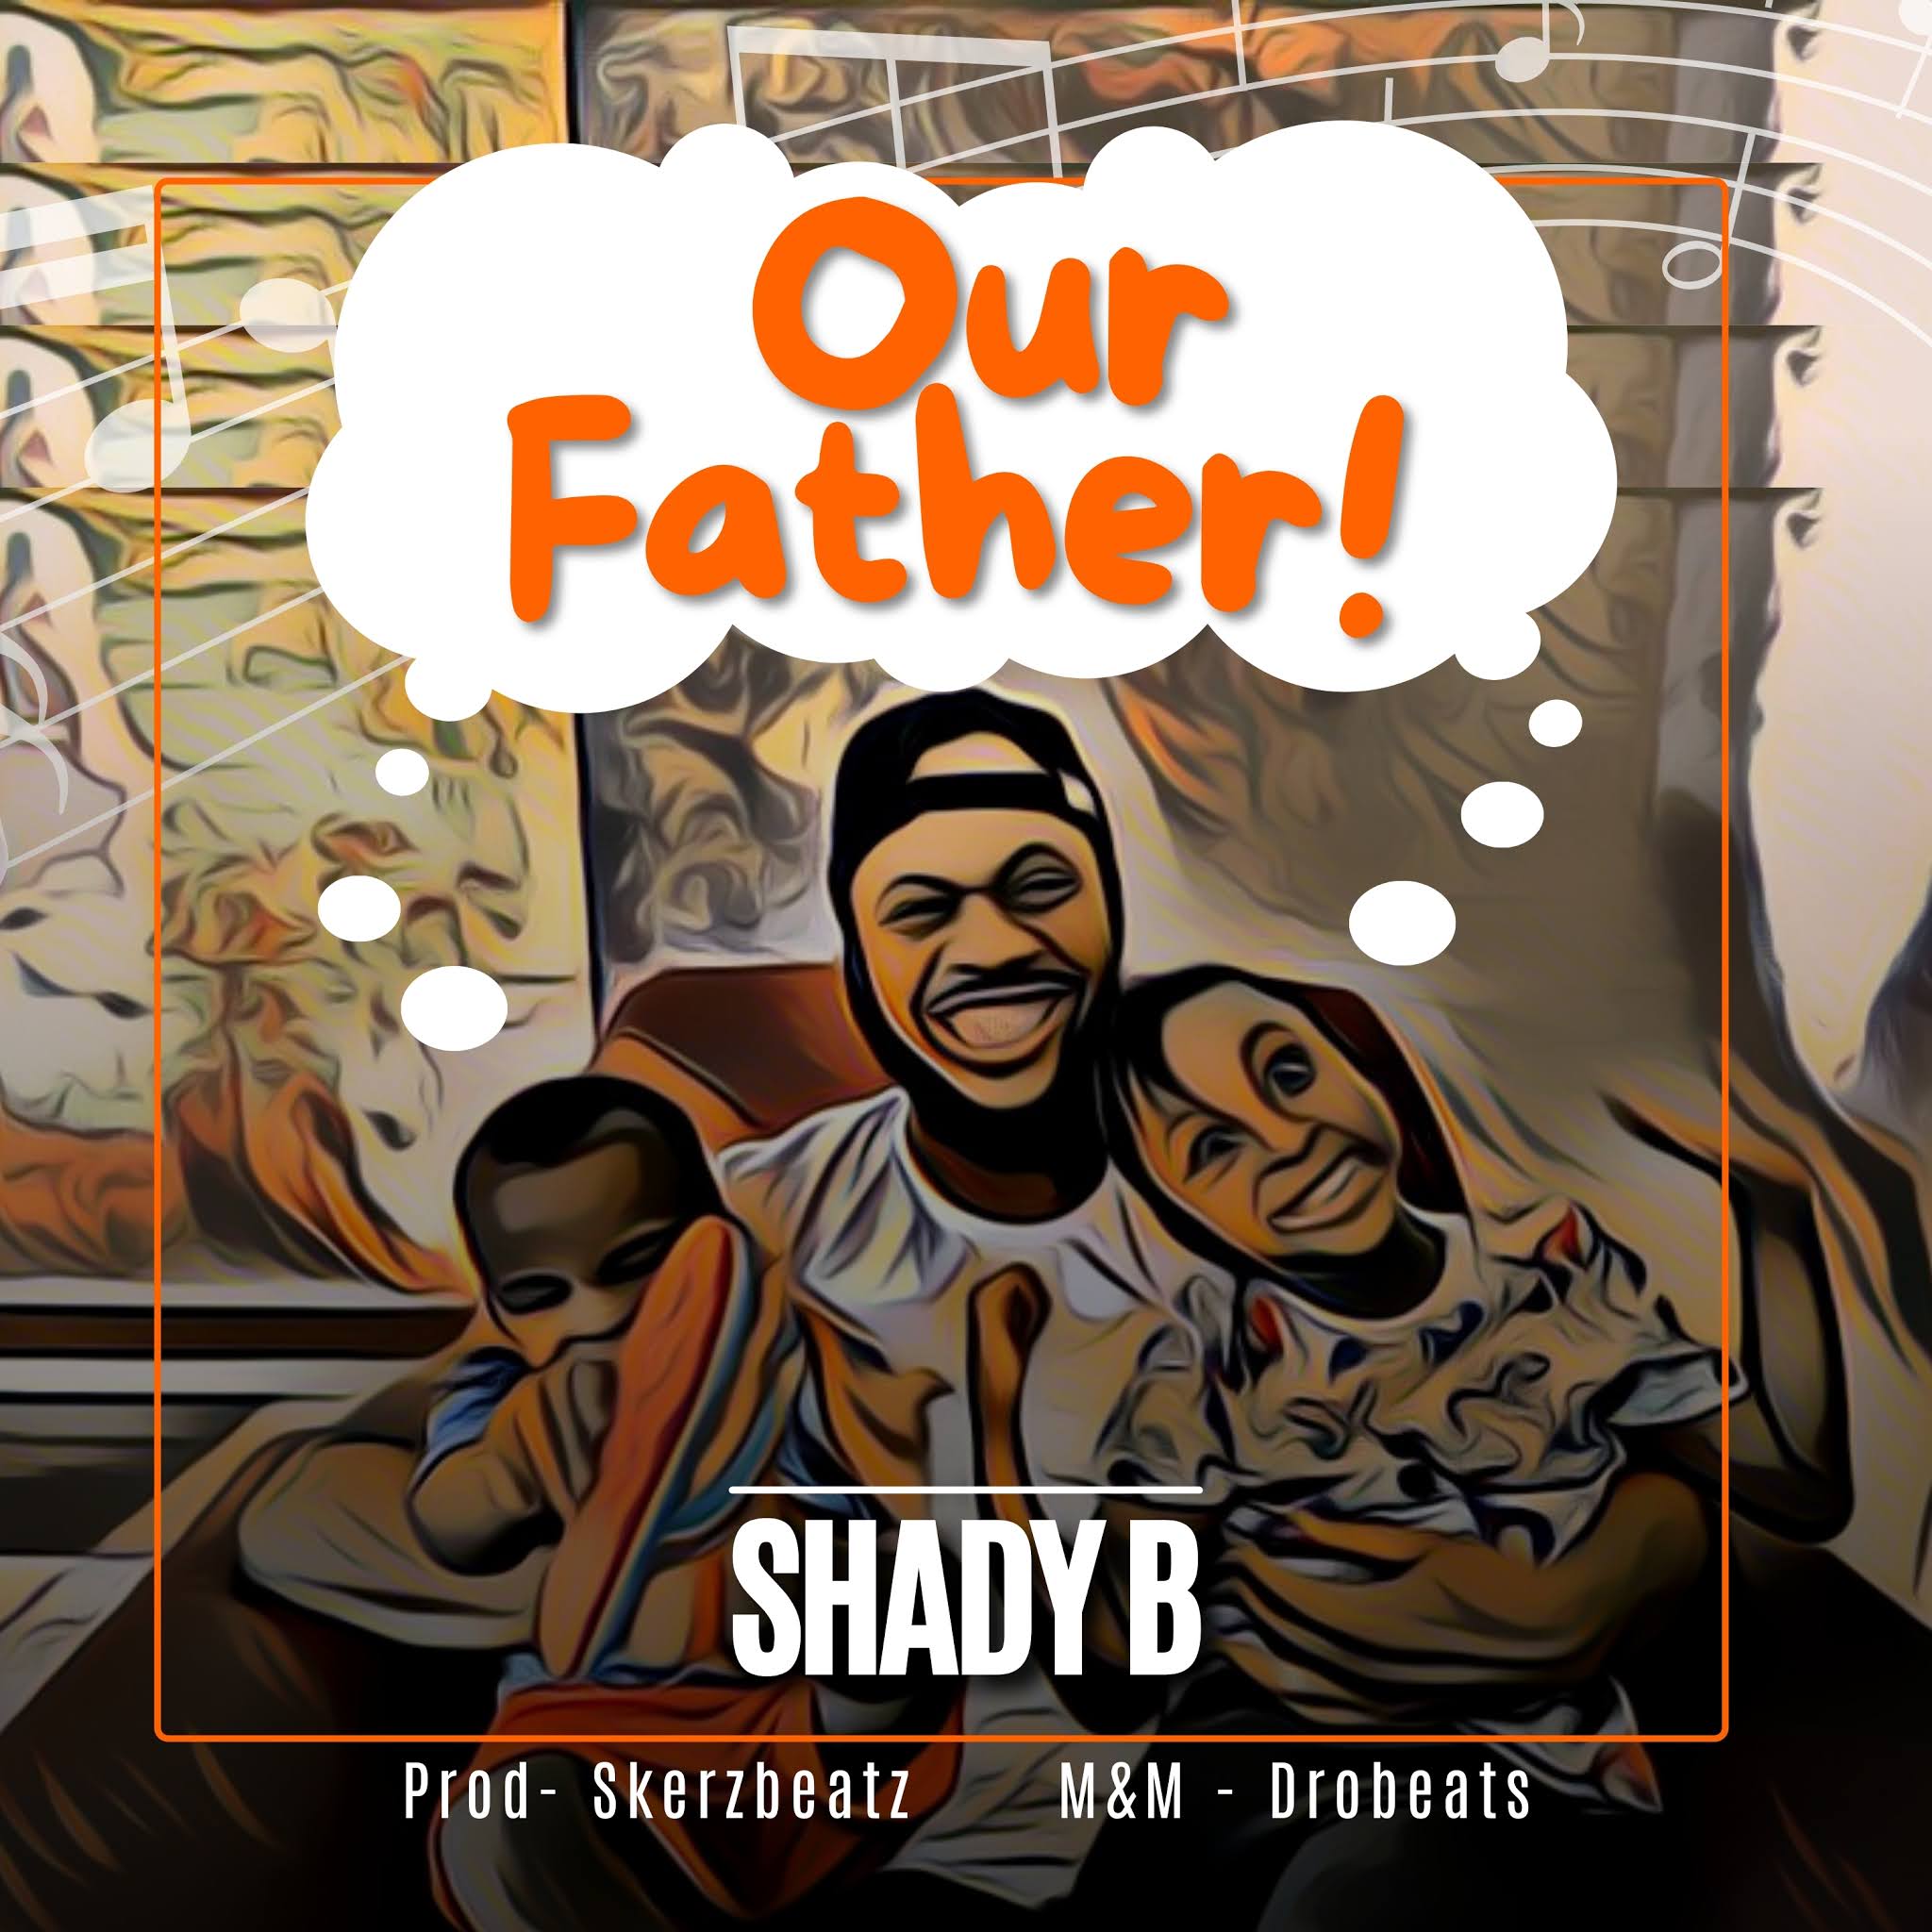 Shady B - Our Father